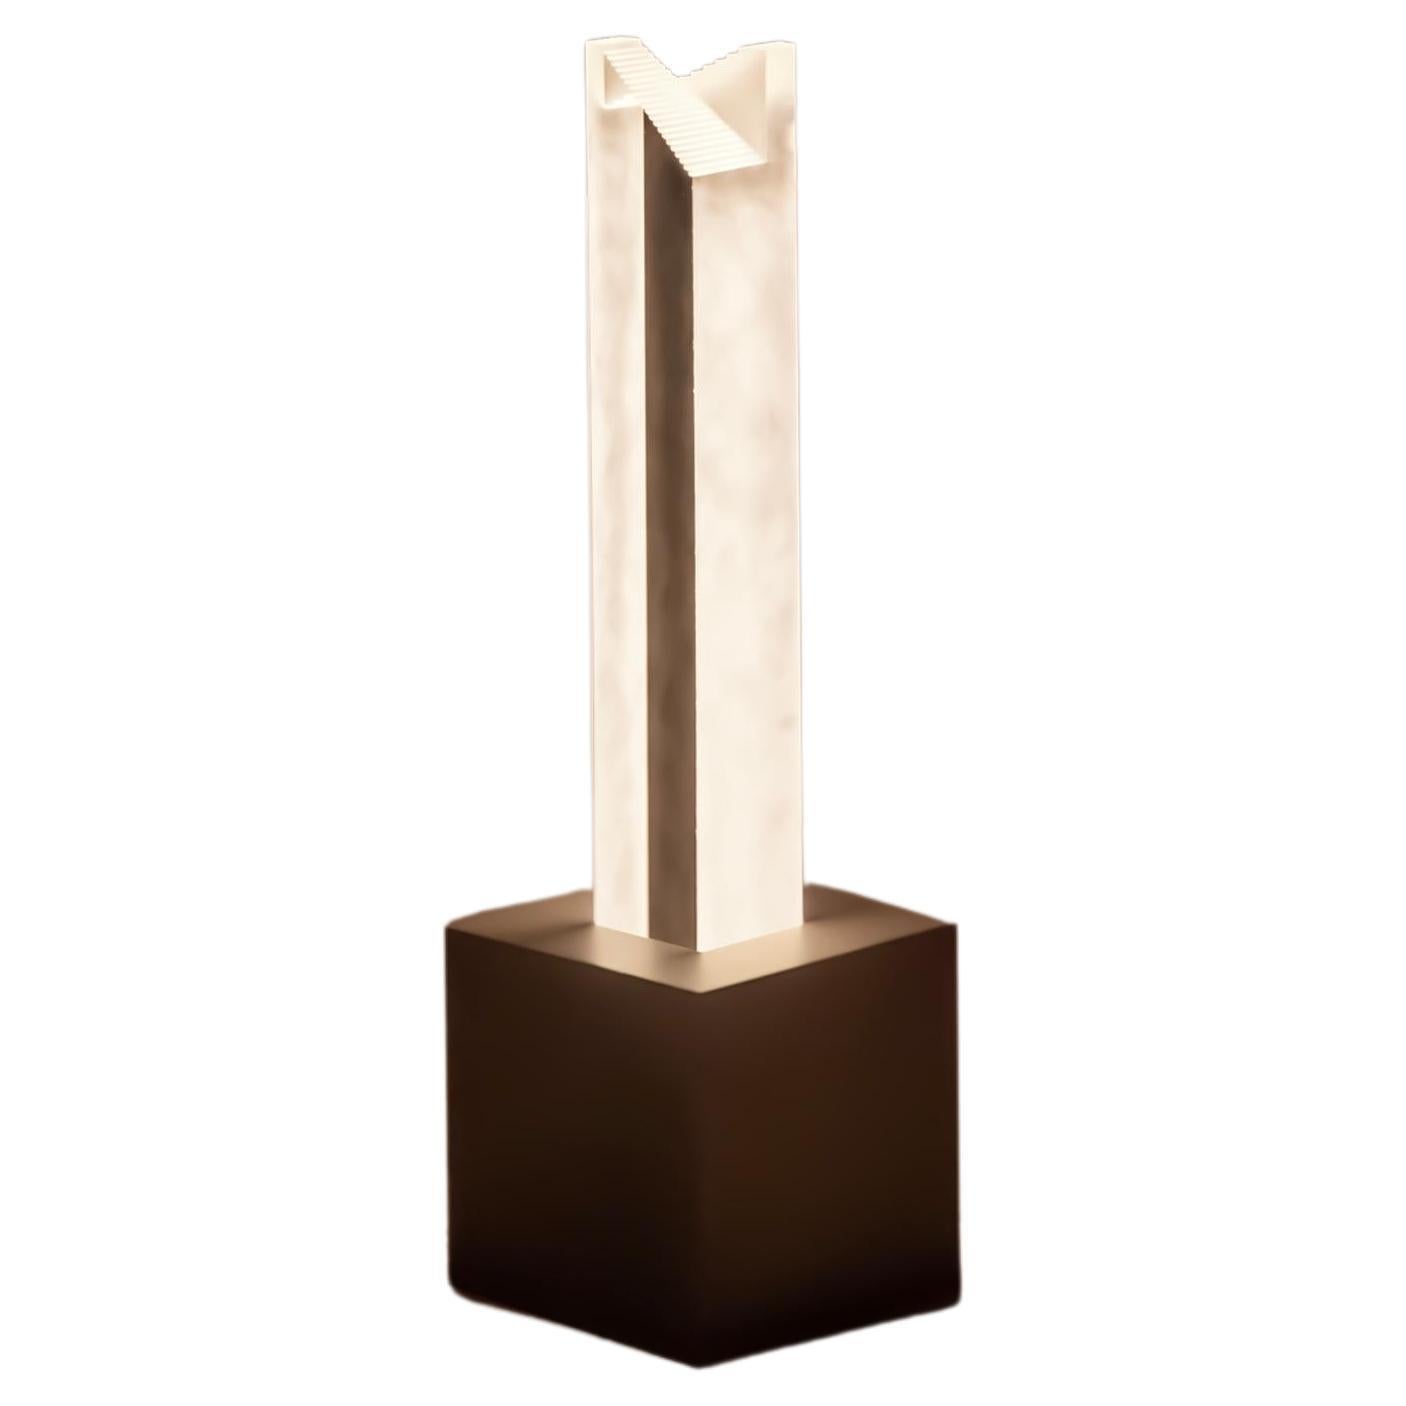 Obelisk I Floor Lamp by Yonathan Moore, Represented by Tuleste Factory For Sale